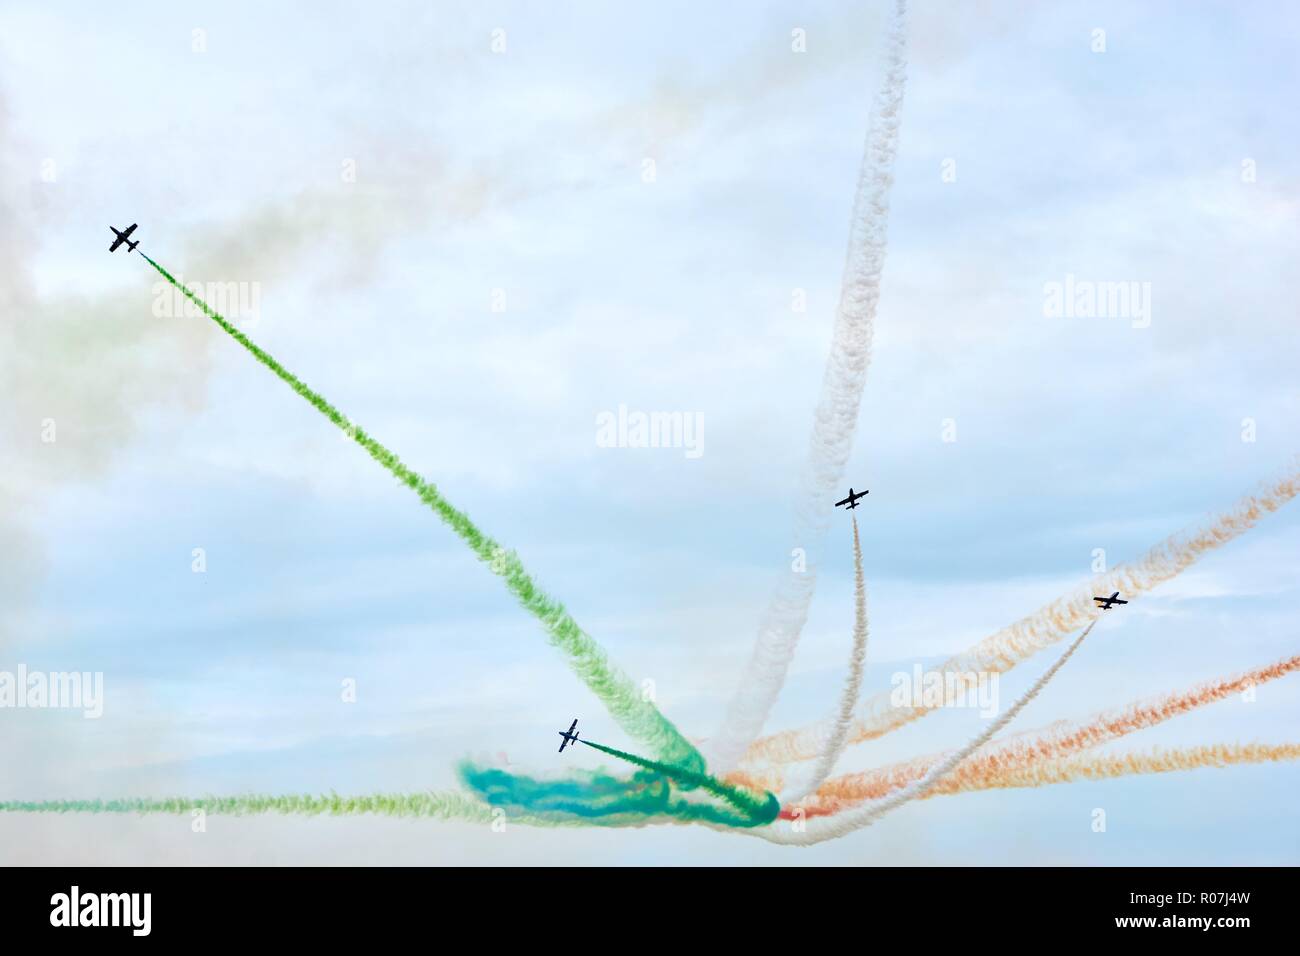 Fighter jets in action during a show. A group of italian fighter jets with colors white, orange and green of the italian flag agains a cloudy sky. Stock Photo